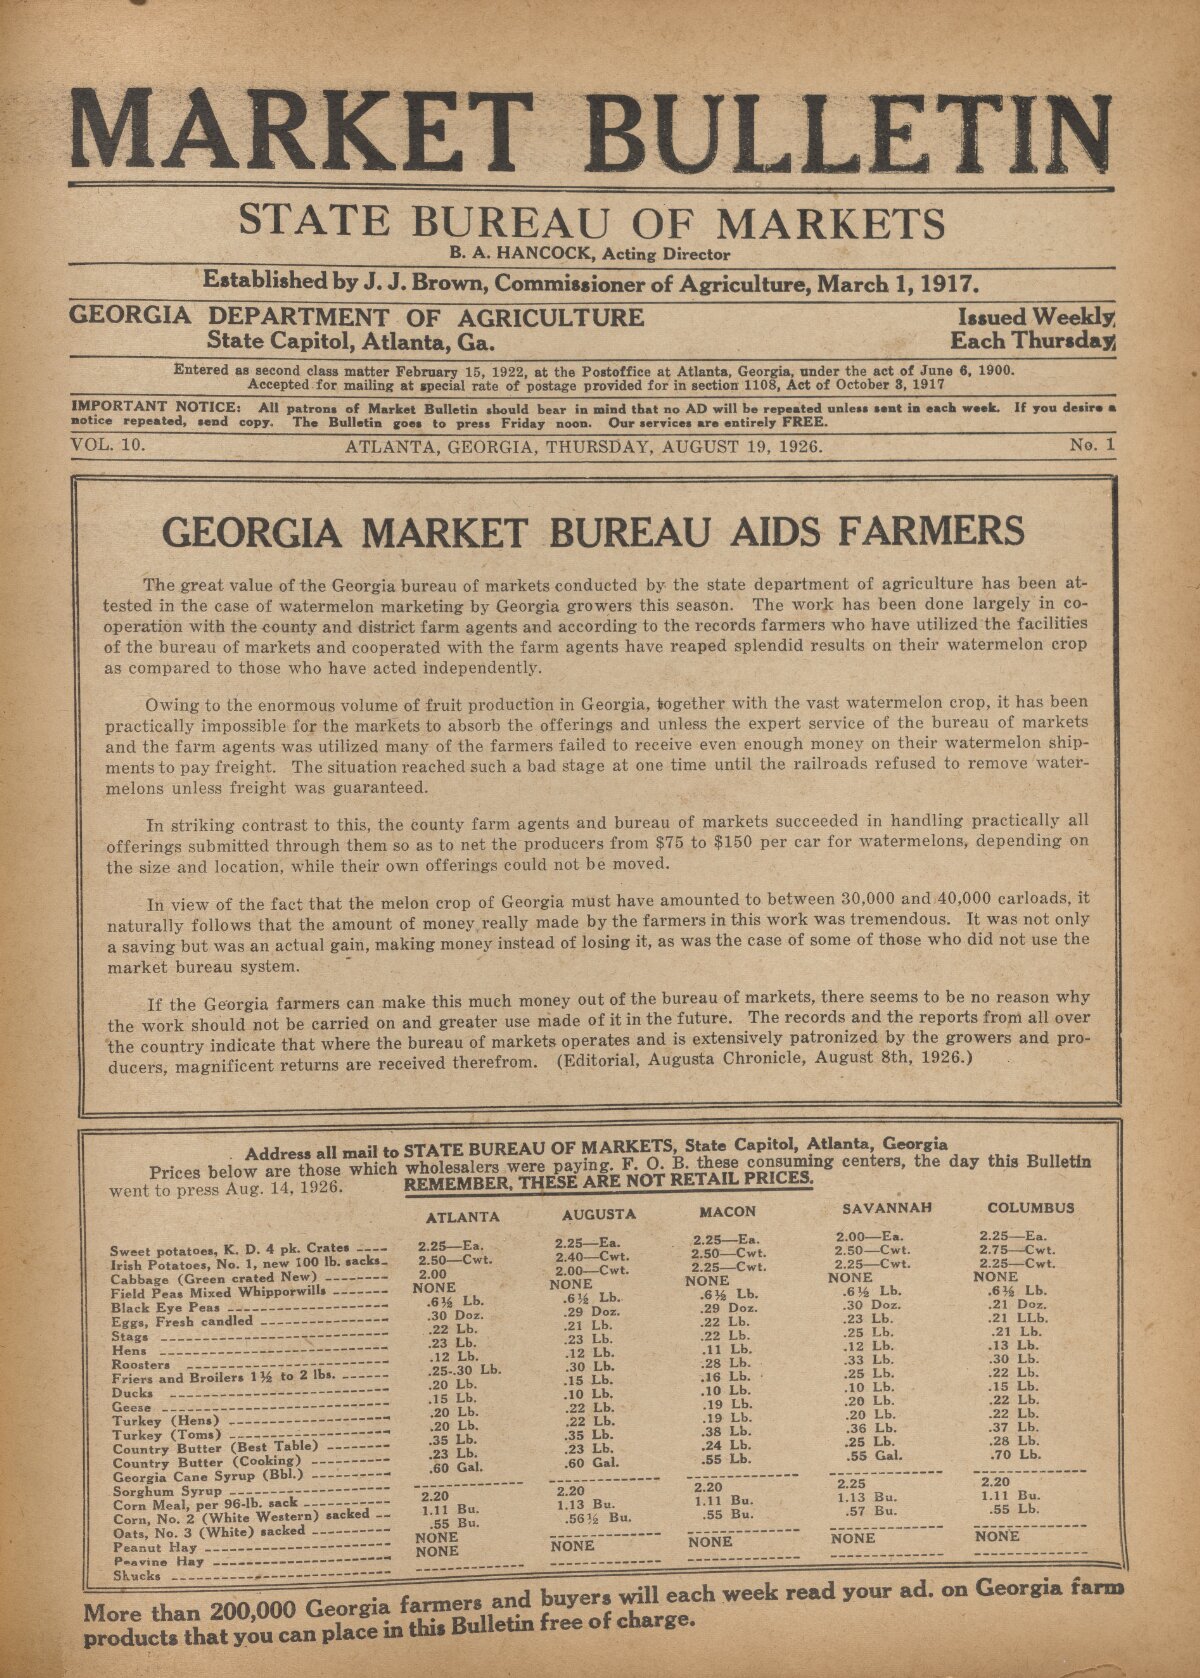 Farmers and consumers market bulletin, 1926 August 19 image picture